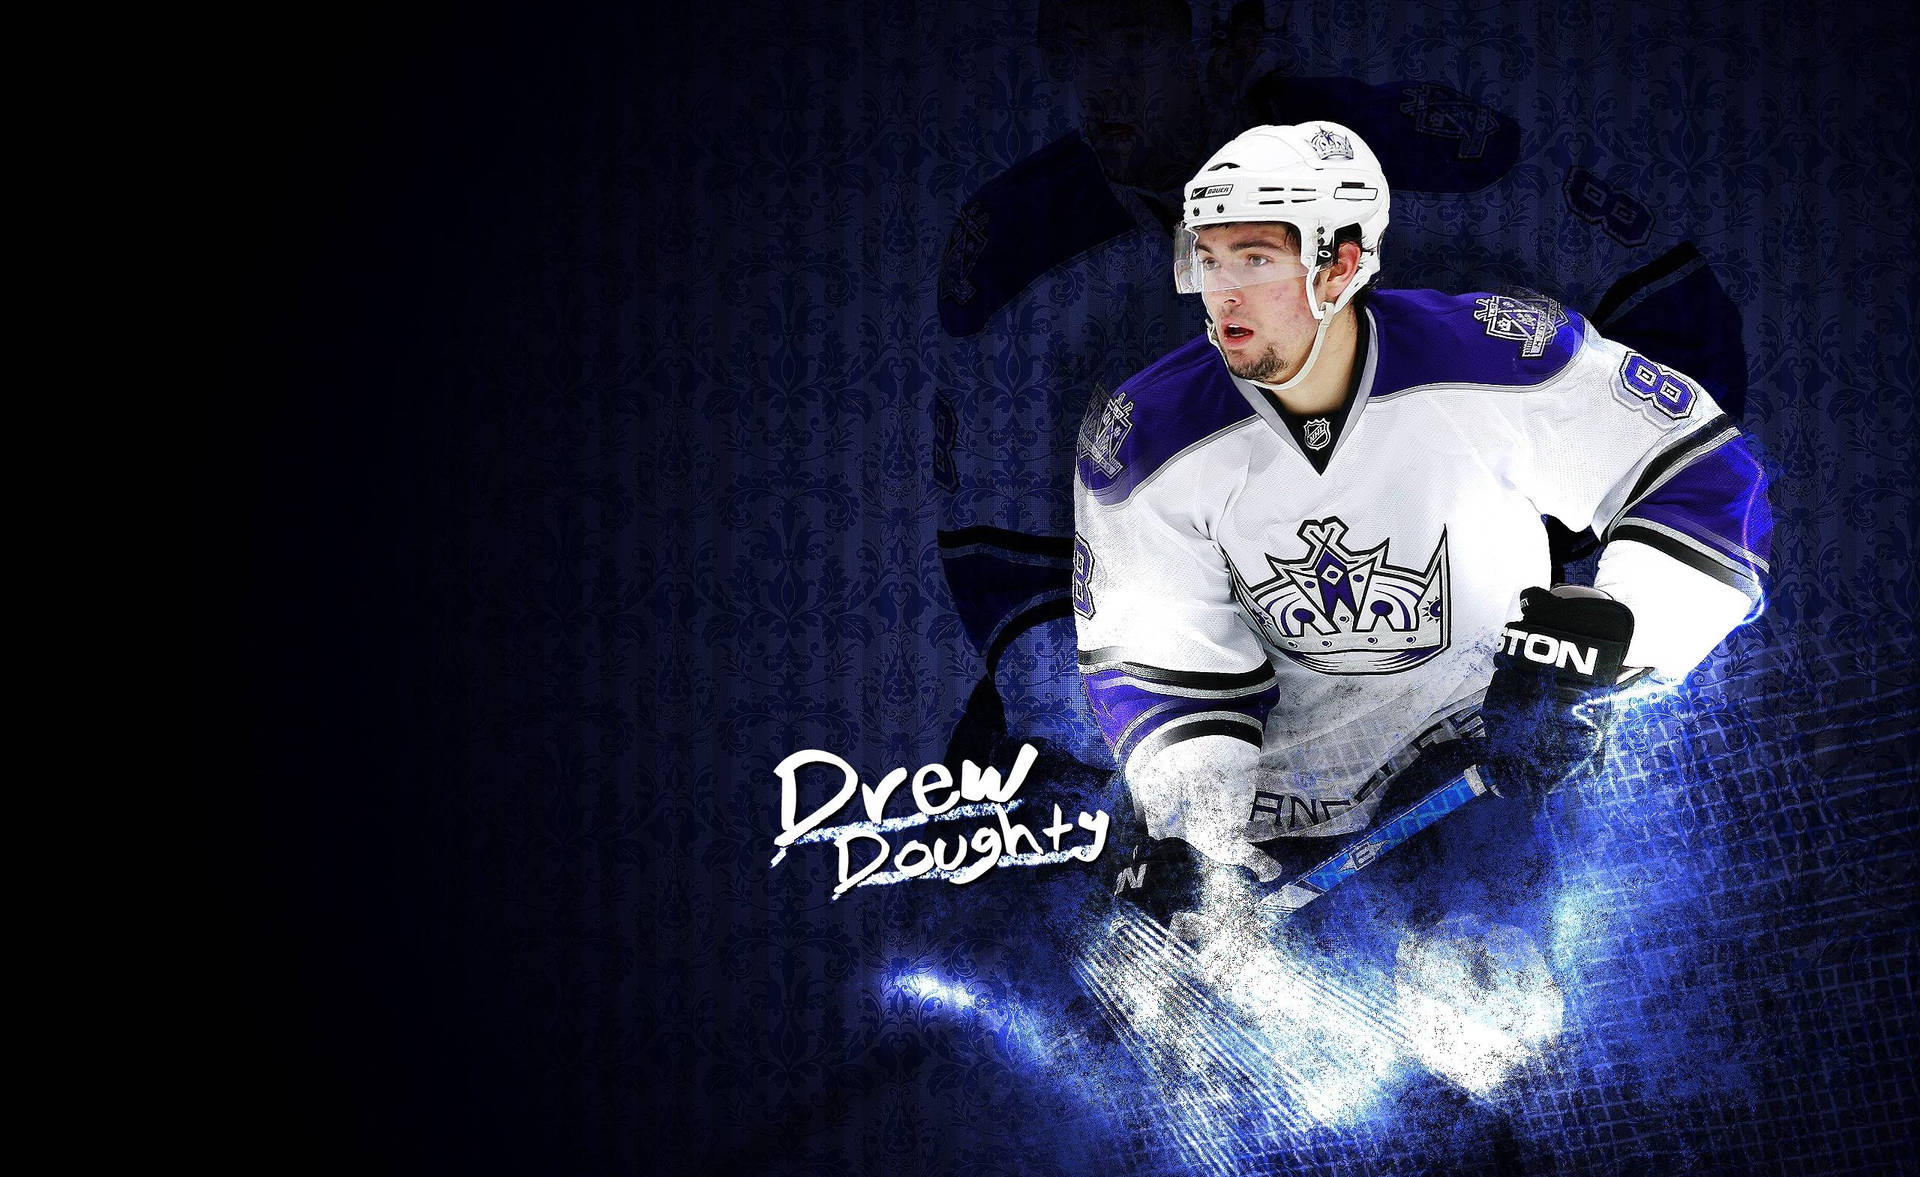 Fearless Defender Drew Doughty in action wearing his white jersey. Wallpaper